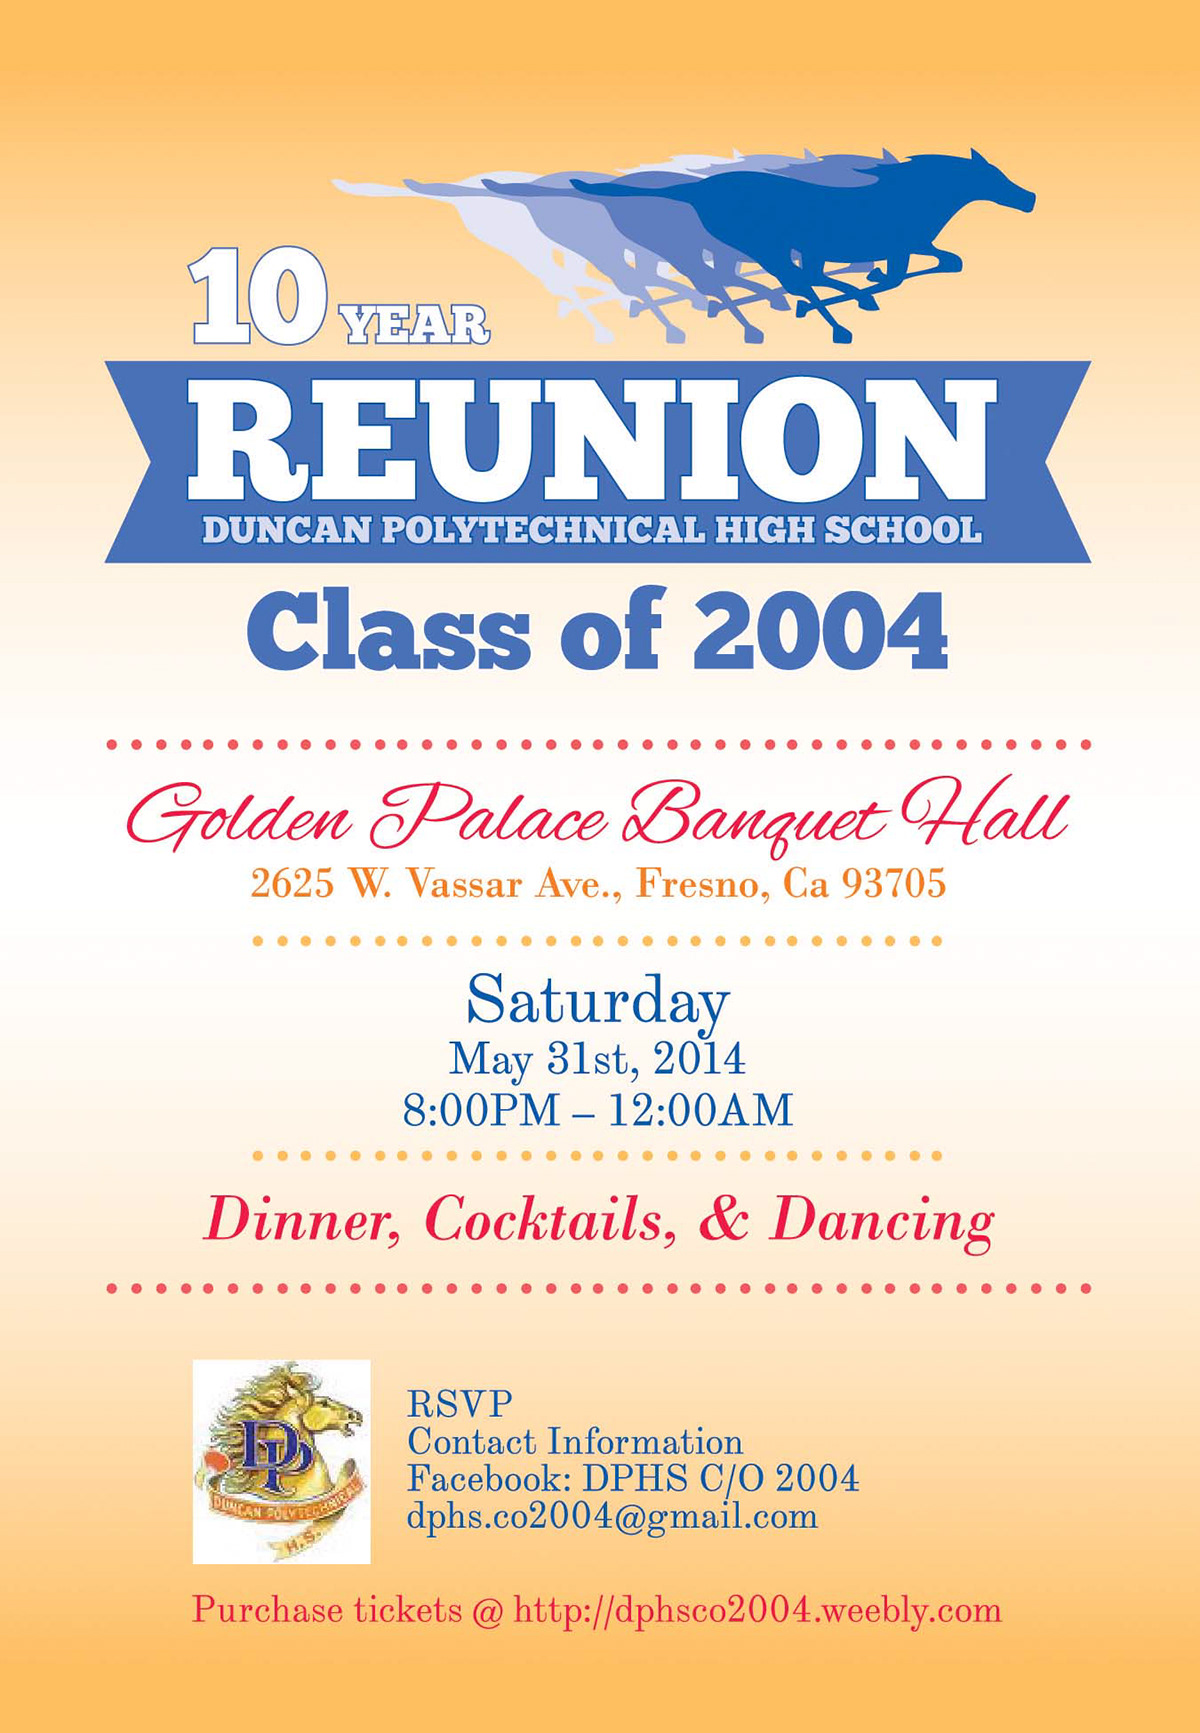 flyer Invitation Card High School reunion 10 years duncan poly class of 04'